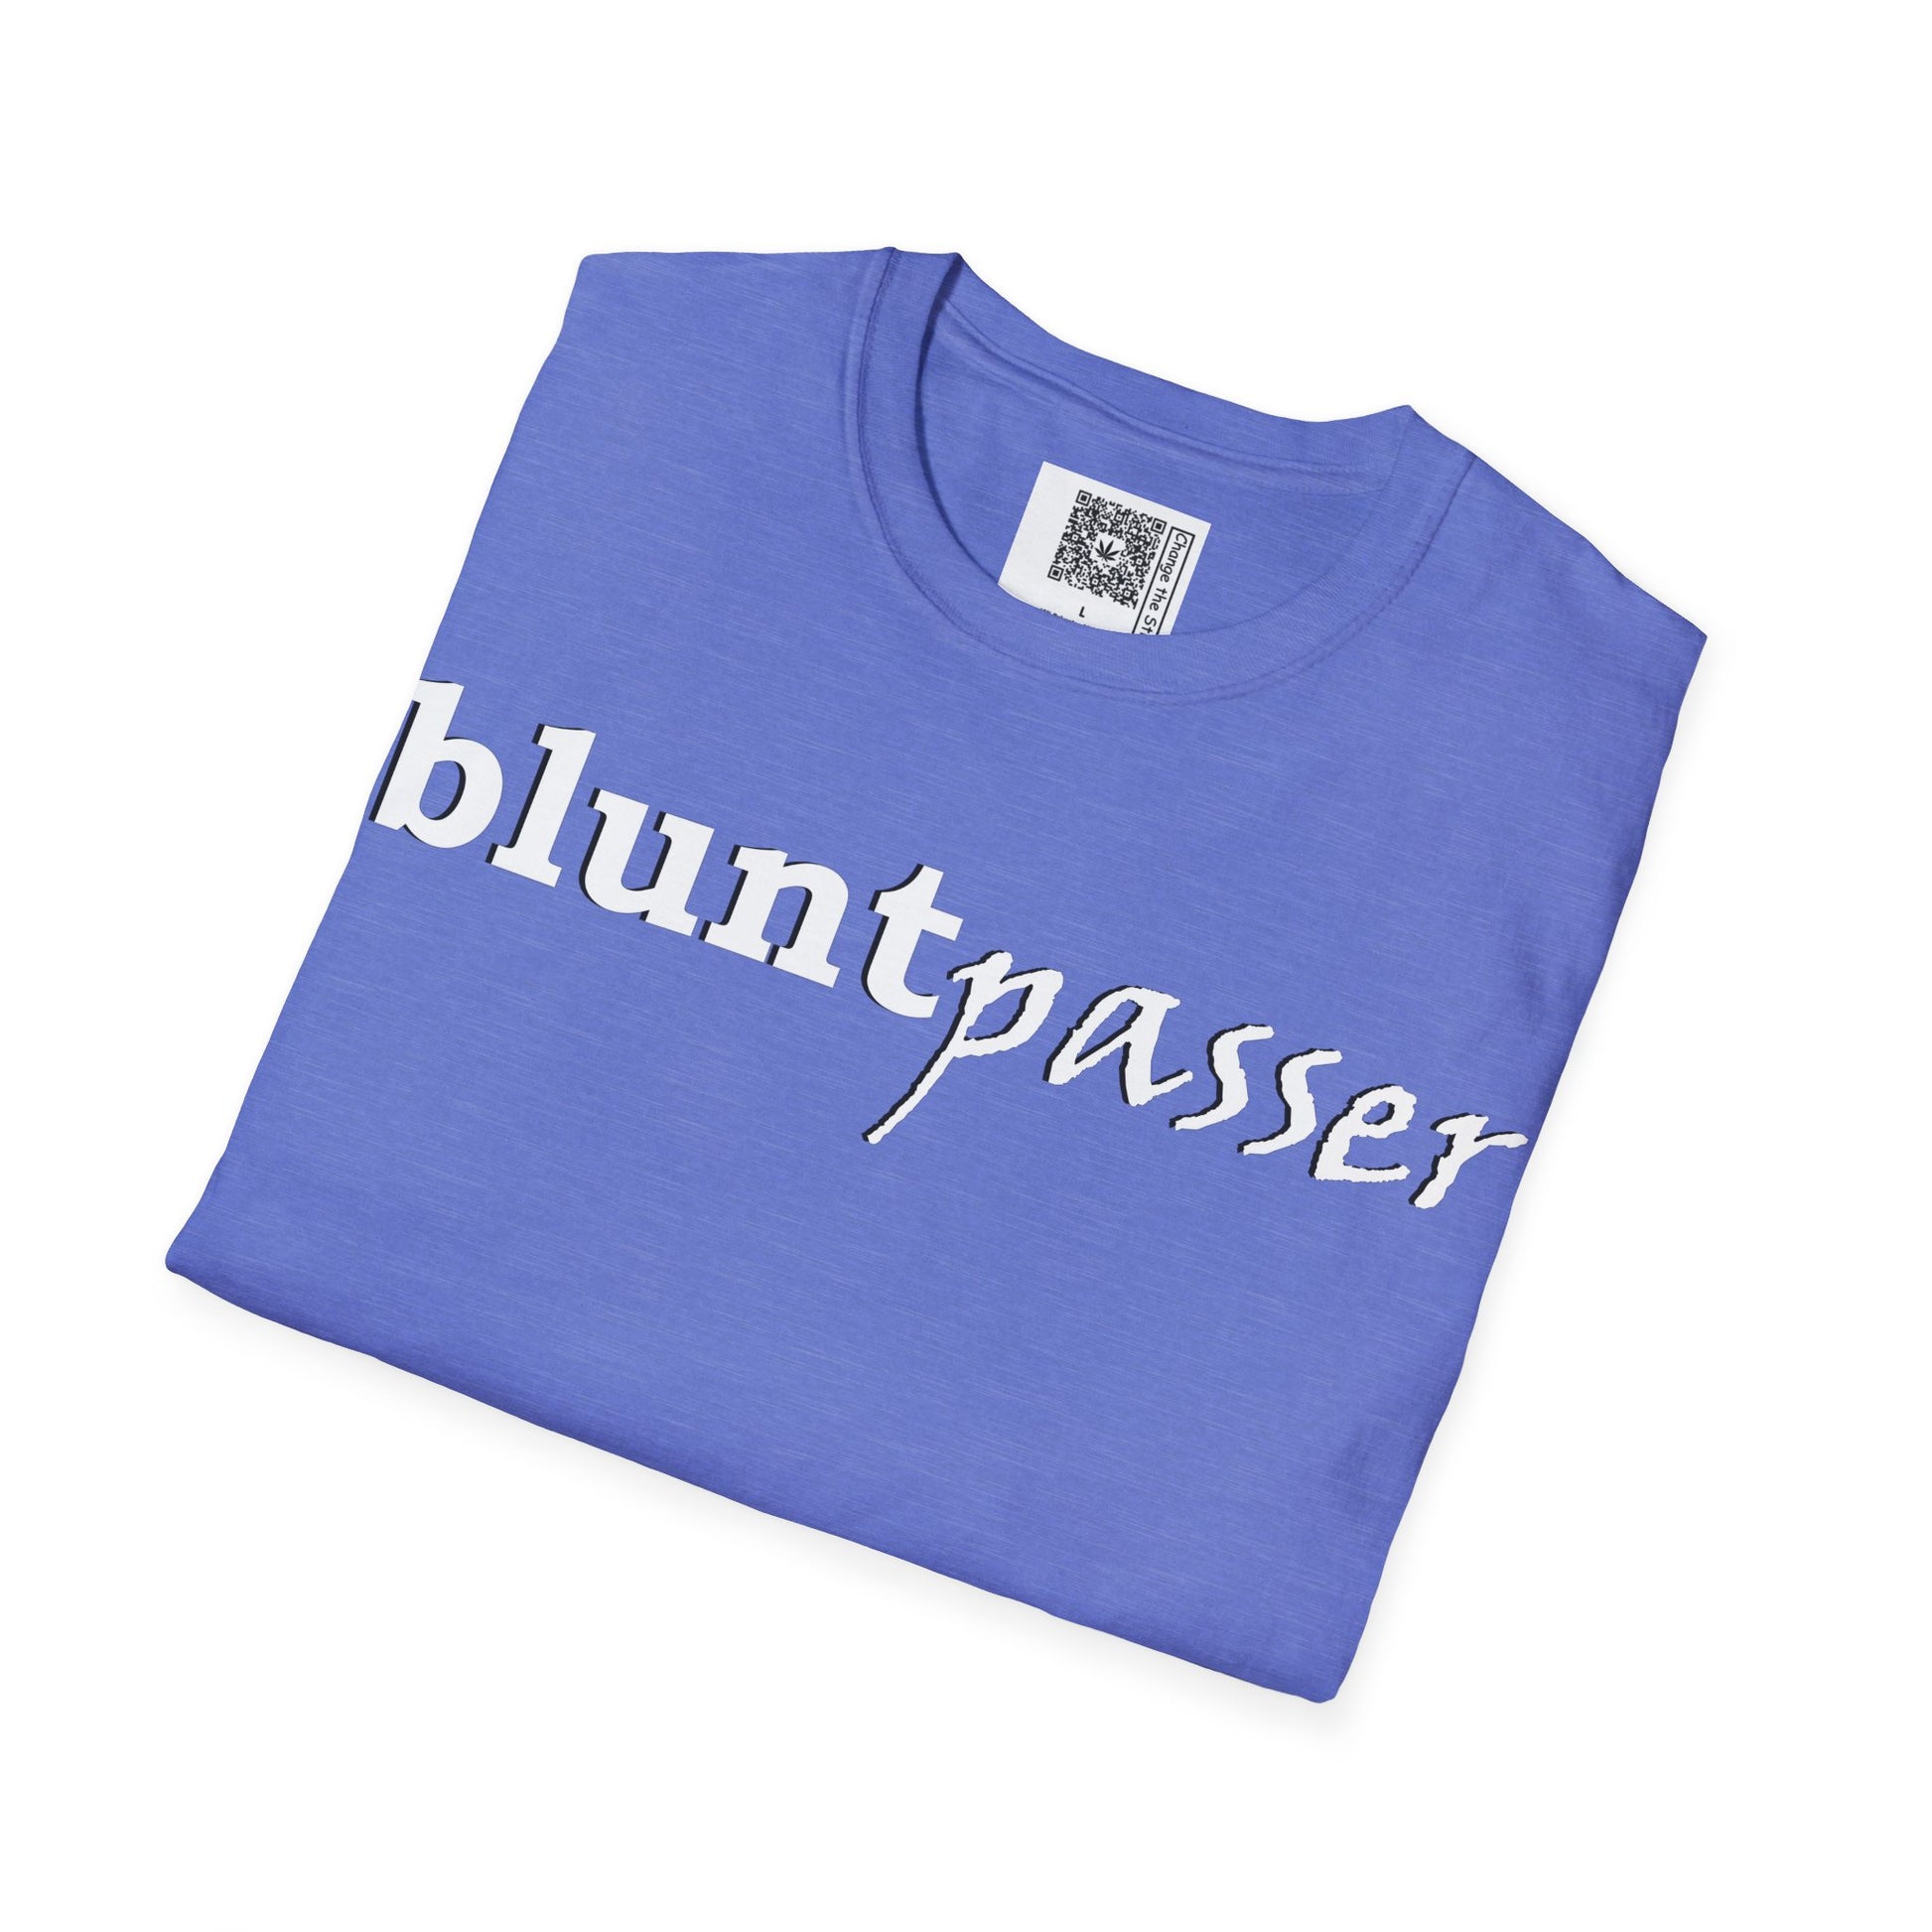 Change the Stigma, Heather Royal color, shirt saying "blunt passer", Folded, Qr code is shown